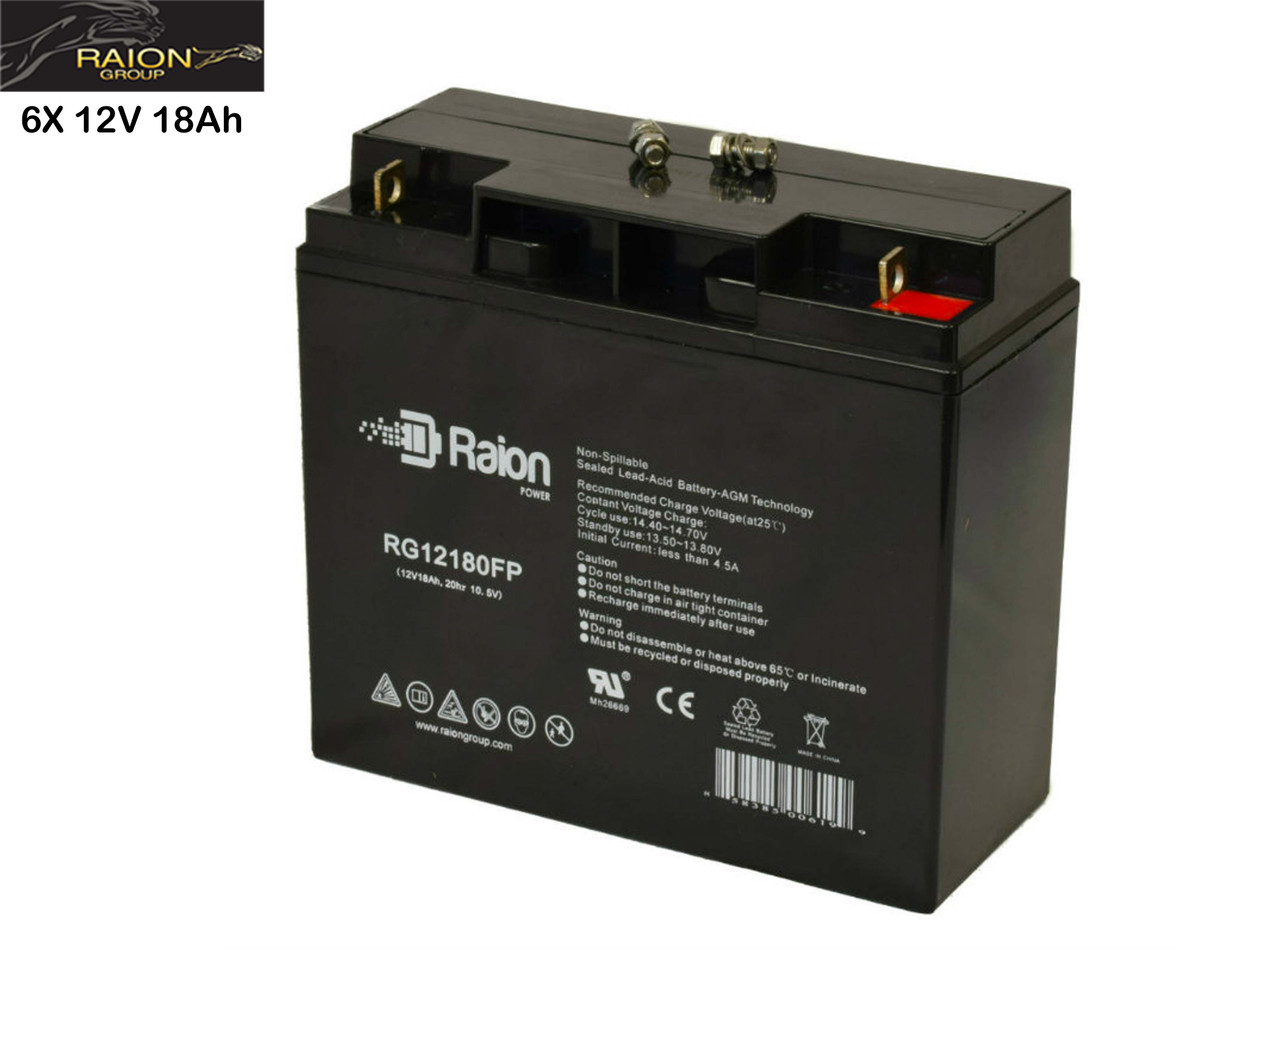 Raion Power Replacement 12V 18Ah Battery for Daymak Austin LED - 6 Pack